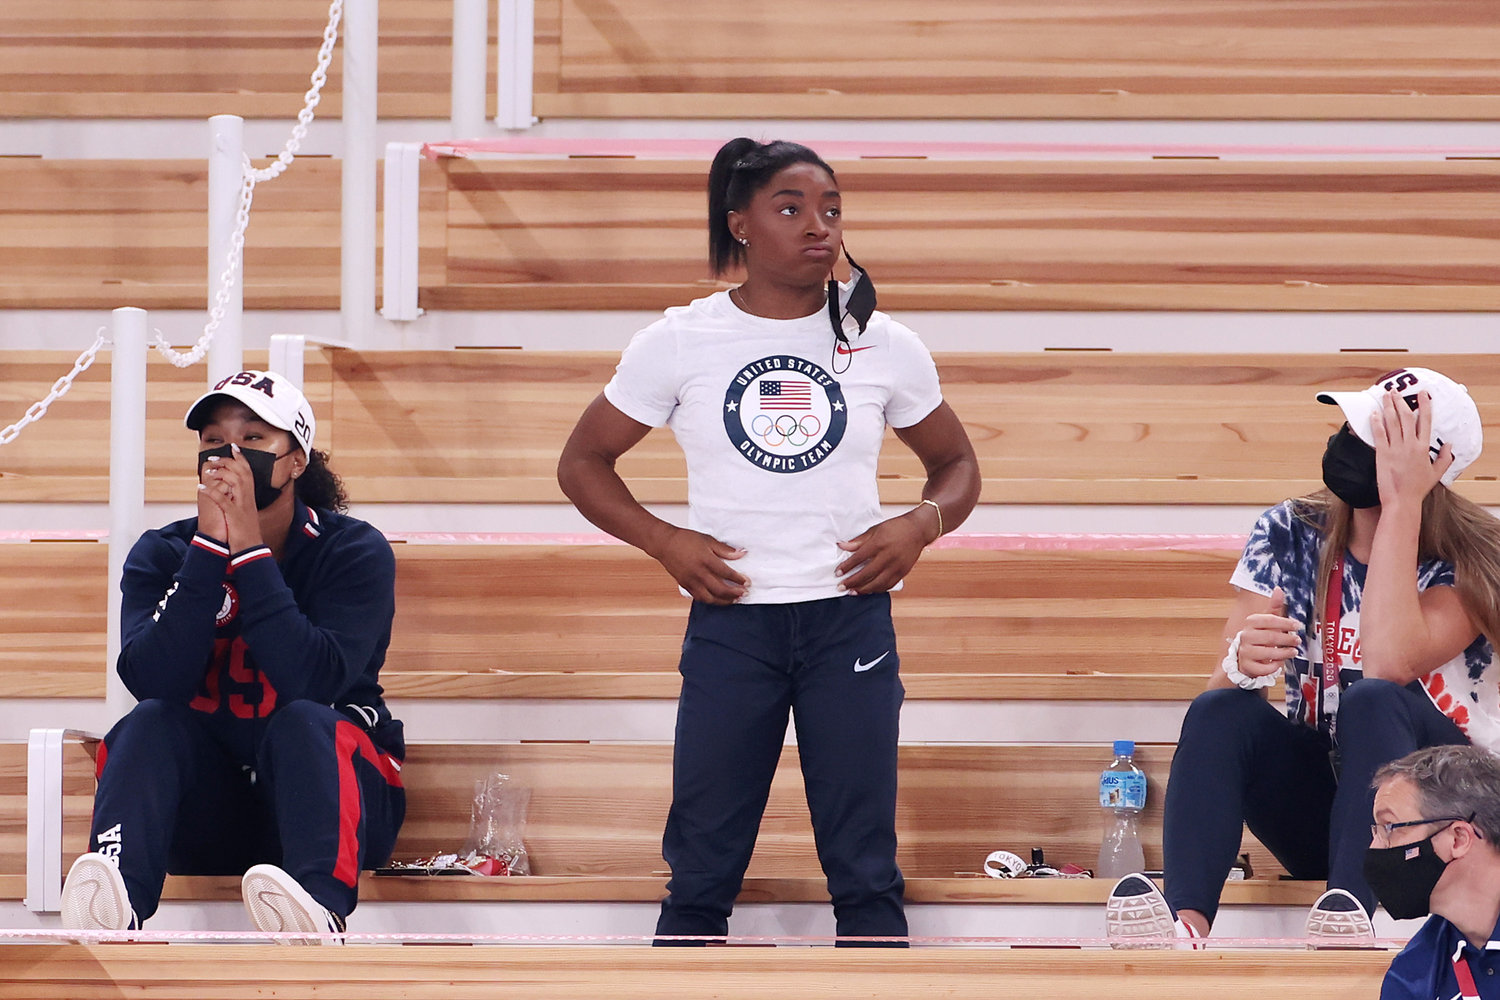 Simone Biles of Team United States watches with teammates Jordan Chiles (left) and Grace McCallum (right) from the stands during the Women's Vault Final on day nine of the Tokyo 2020 Olympic Games at Ariake Gymnastics Centre on Sunday, August 1, 2021 in Tokyo, Japan. (Jamie Squire/Getty Images/TNS)